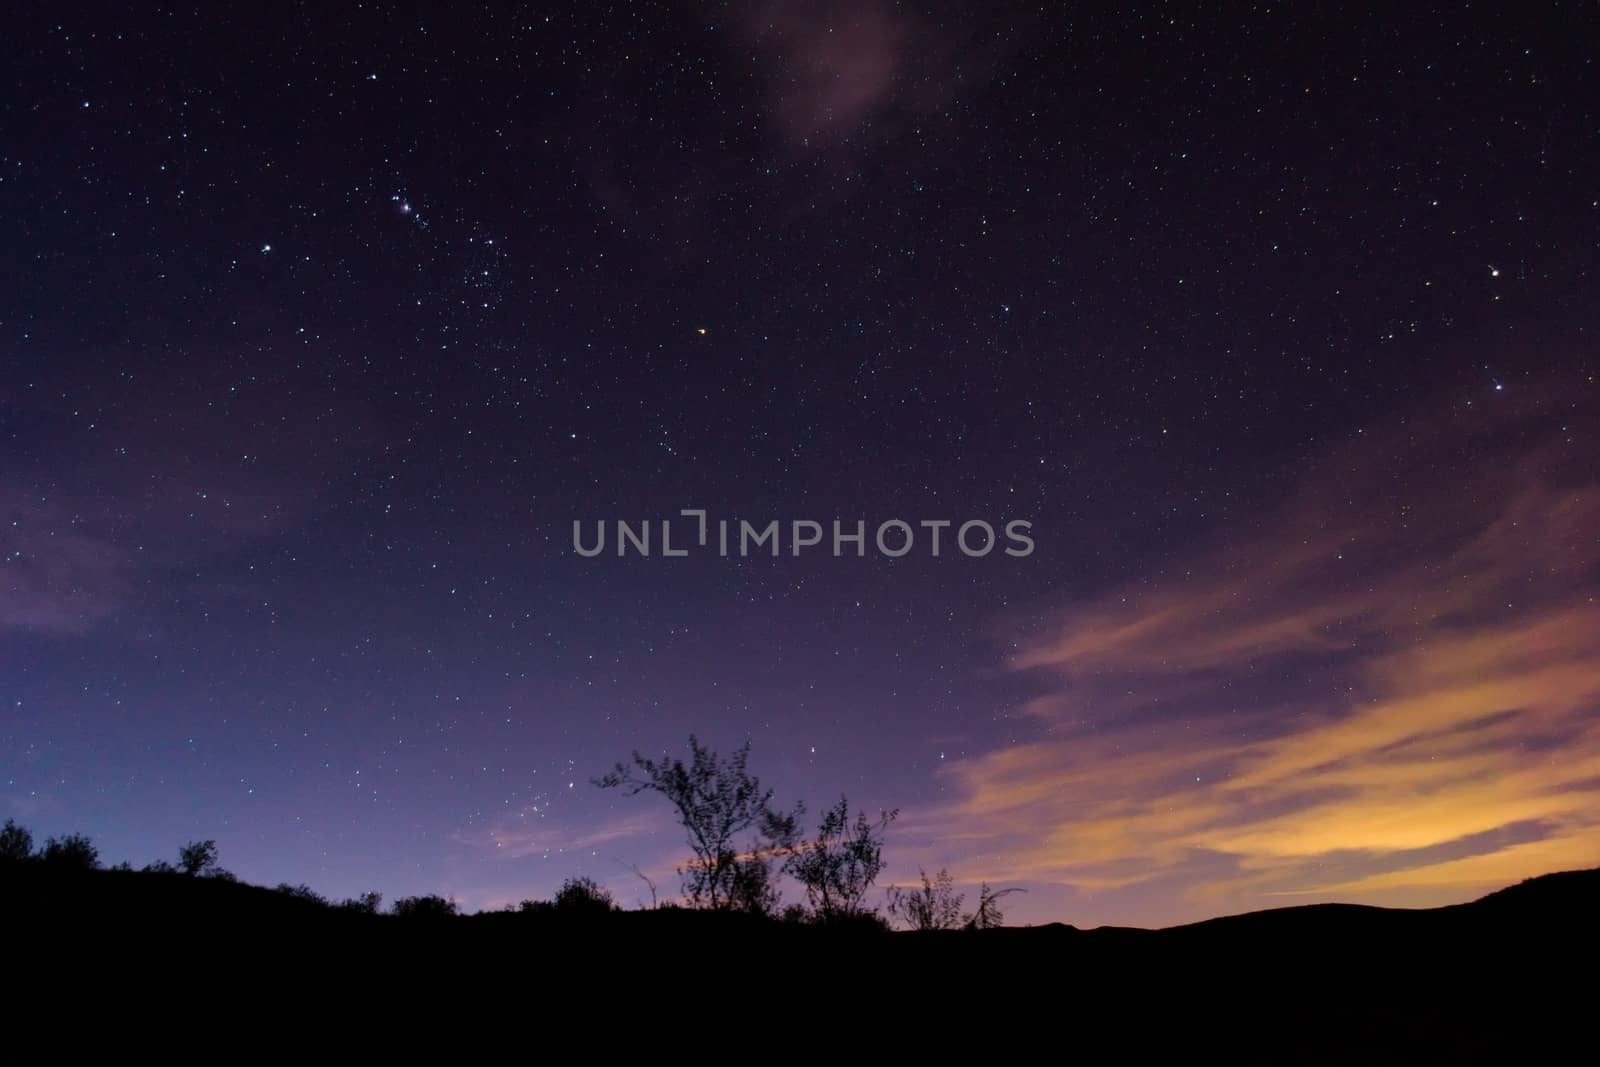 Night sky above the desert. Light pollution from the nearby city can be seen on the right side of the picture.